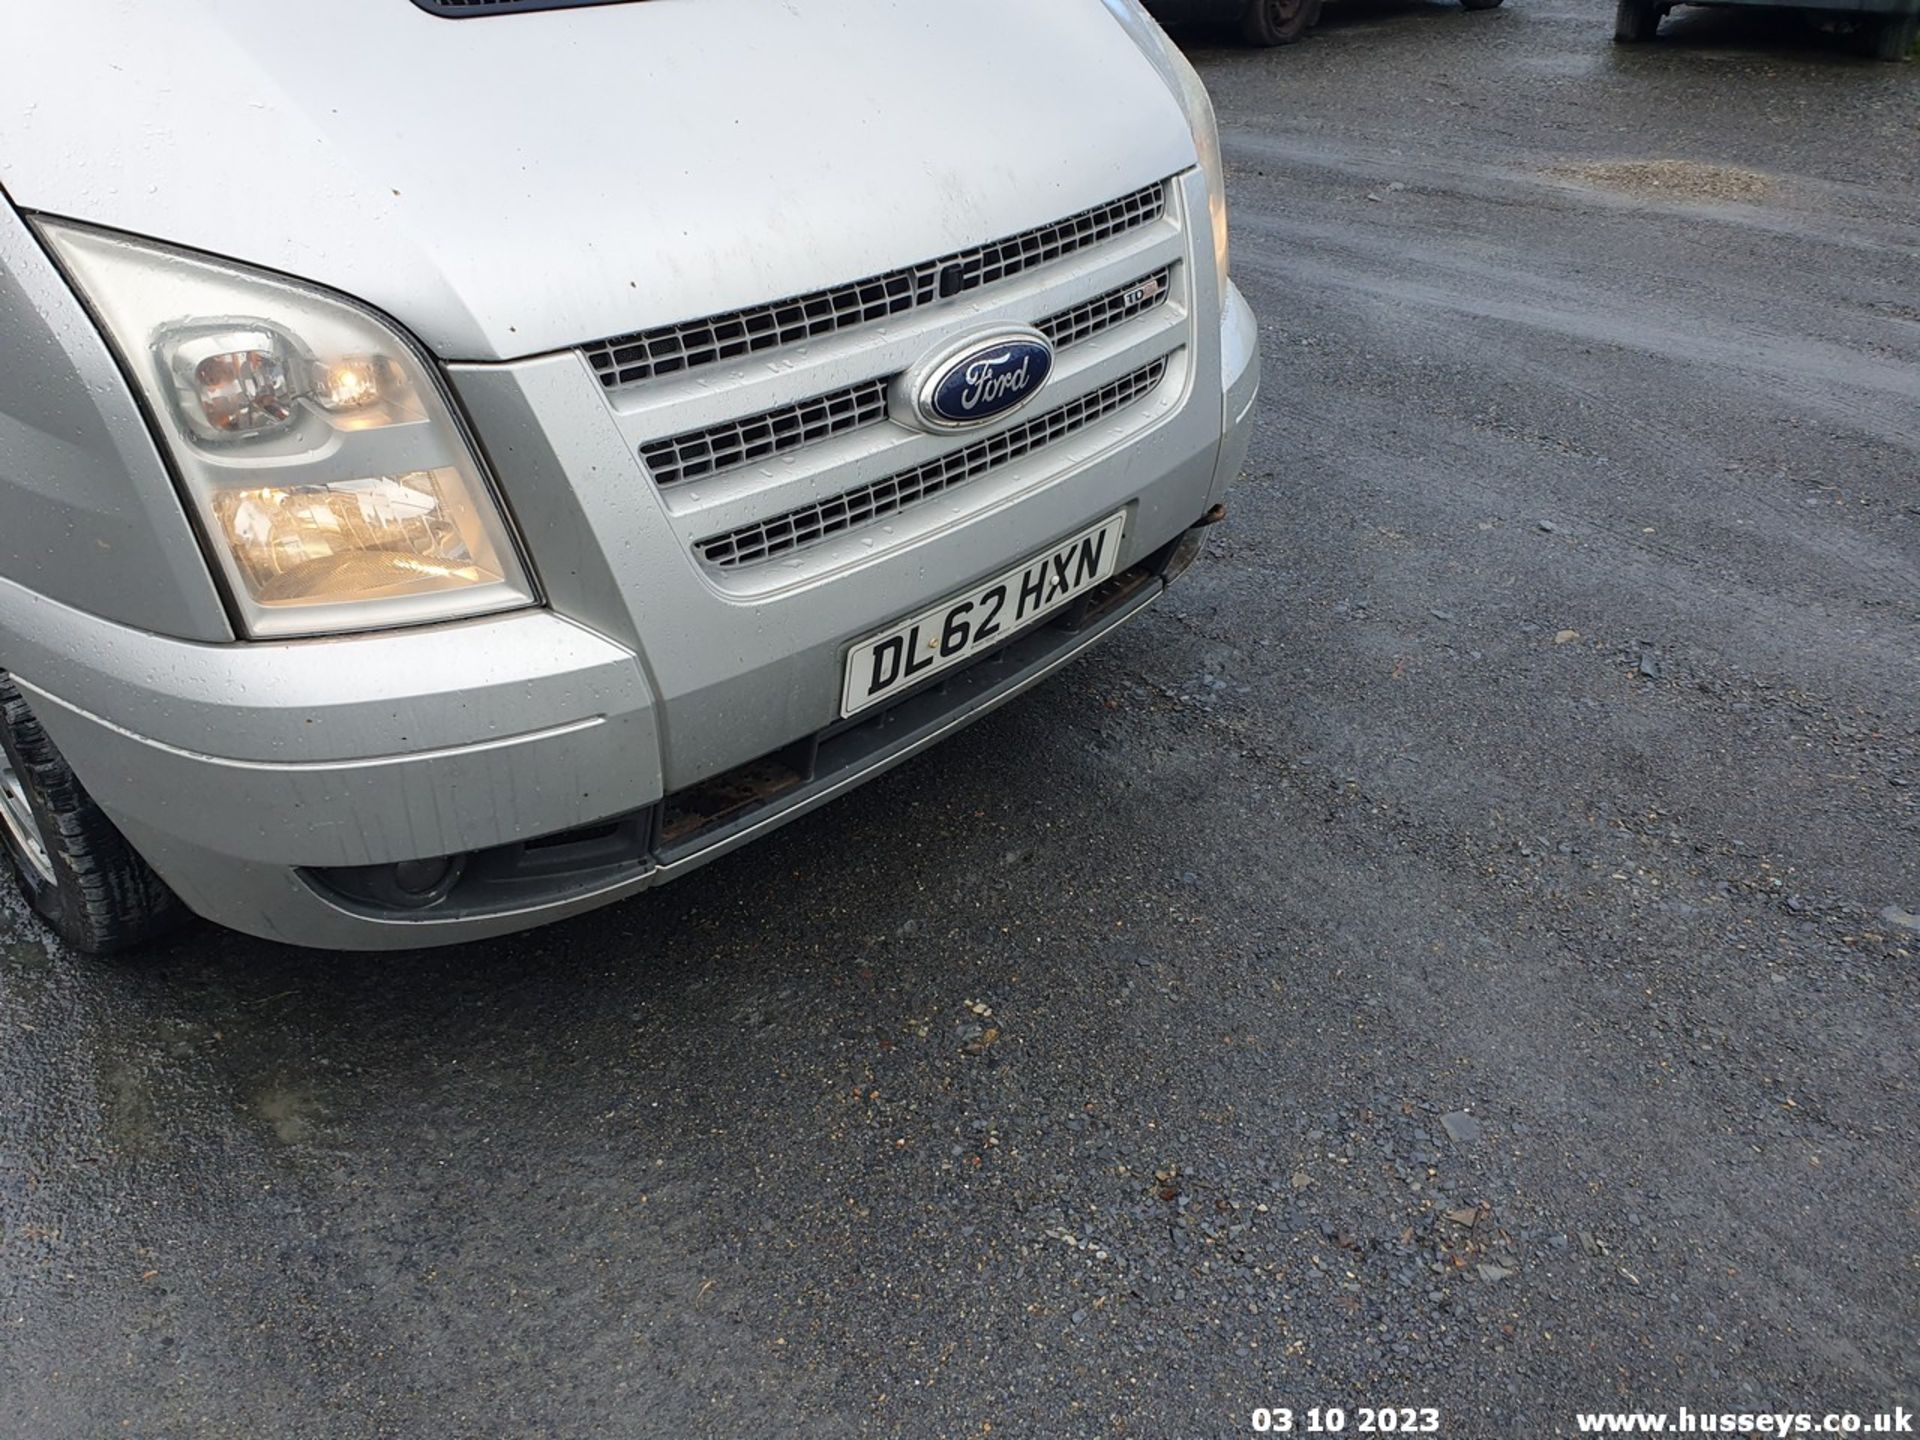 13/62 FORD TRANSIT 125 T280 FWD - 2198cc 5dr MPV (Silver, 146k) - Image 27 of 65